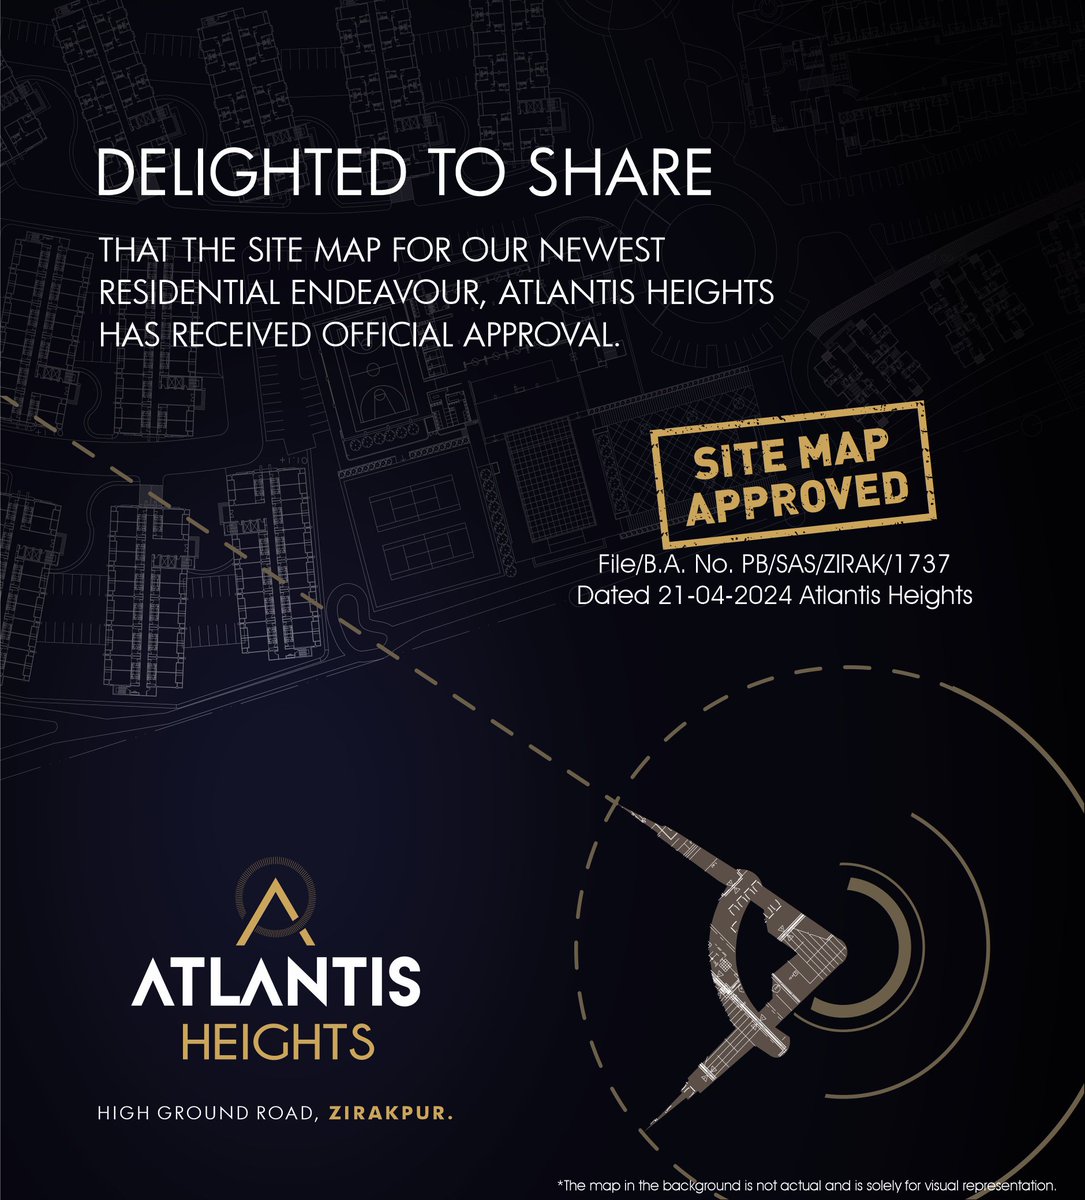 DELIGHTED TO SHARE
THAT THE SITE MAP FOR OUR NEWEST RESIDENTIAL ENDEAVOUR, ATLANTIS HEIGHTS HAS RECEIVED OFFICIAL APPROVAL.
.
.
#AtlantisHeights #Map #Approved #MilestoneAchievement #SuccessStory #UrbanPlanning #CommunityDevelopment #MappingSuccess #Congratulations #MapApproval